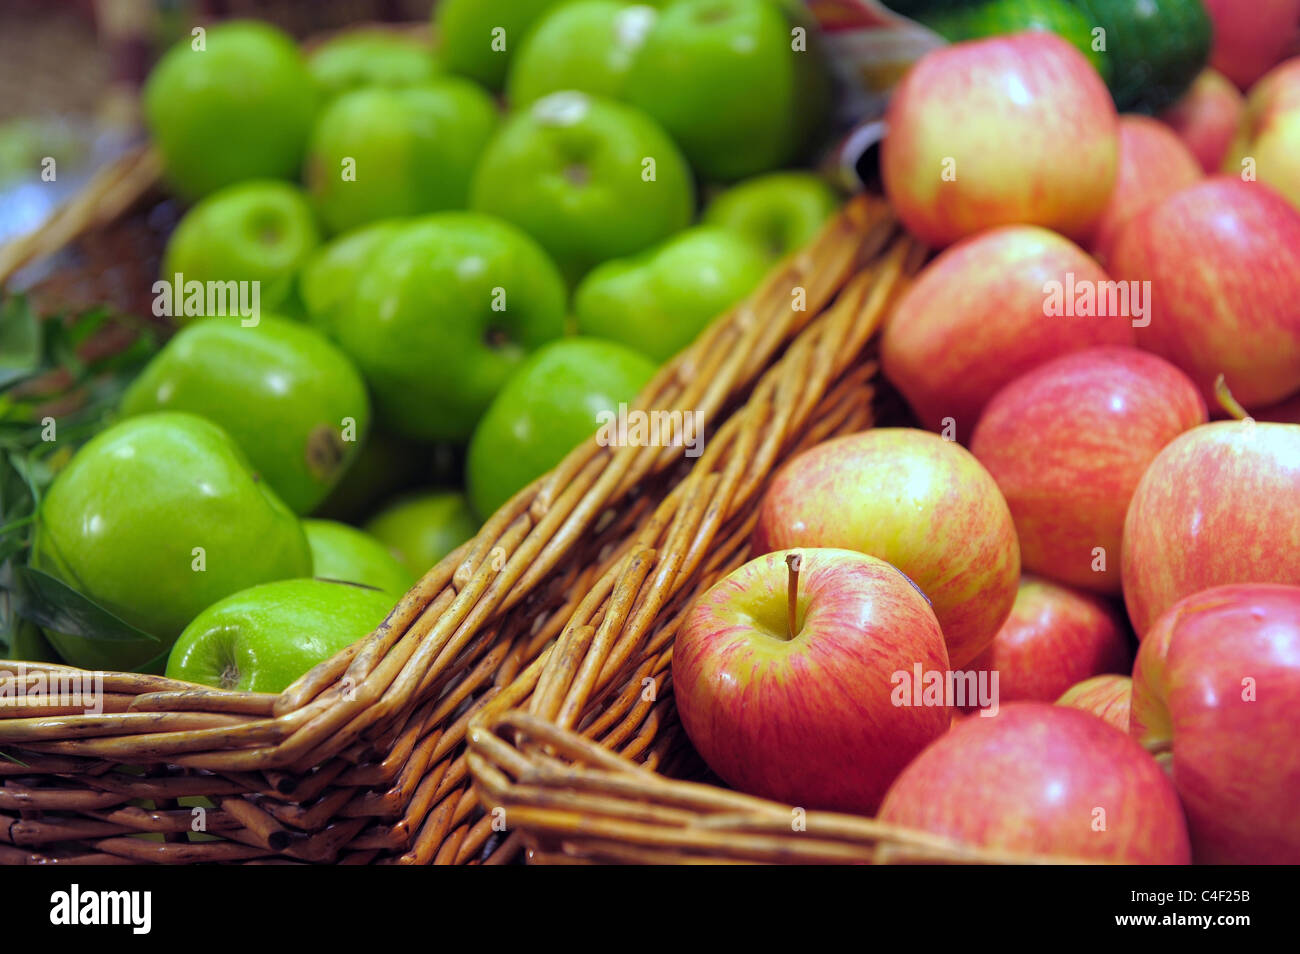 apples on a shop show-window Stock Photo